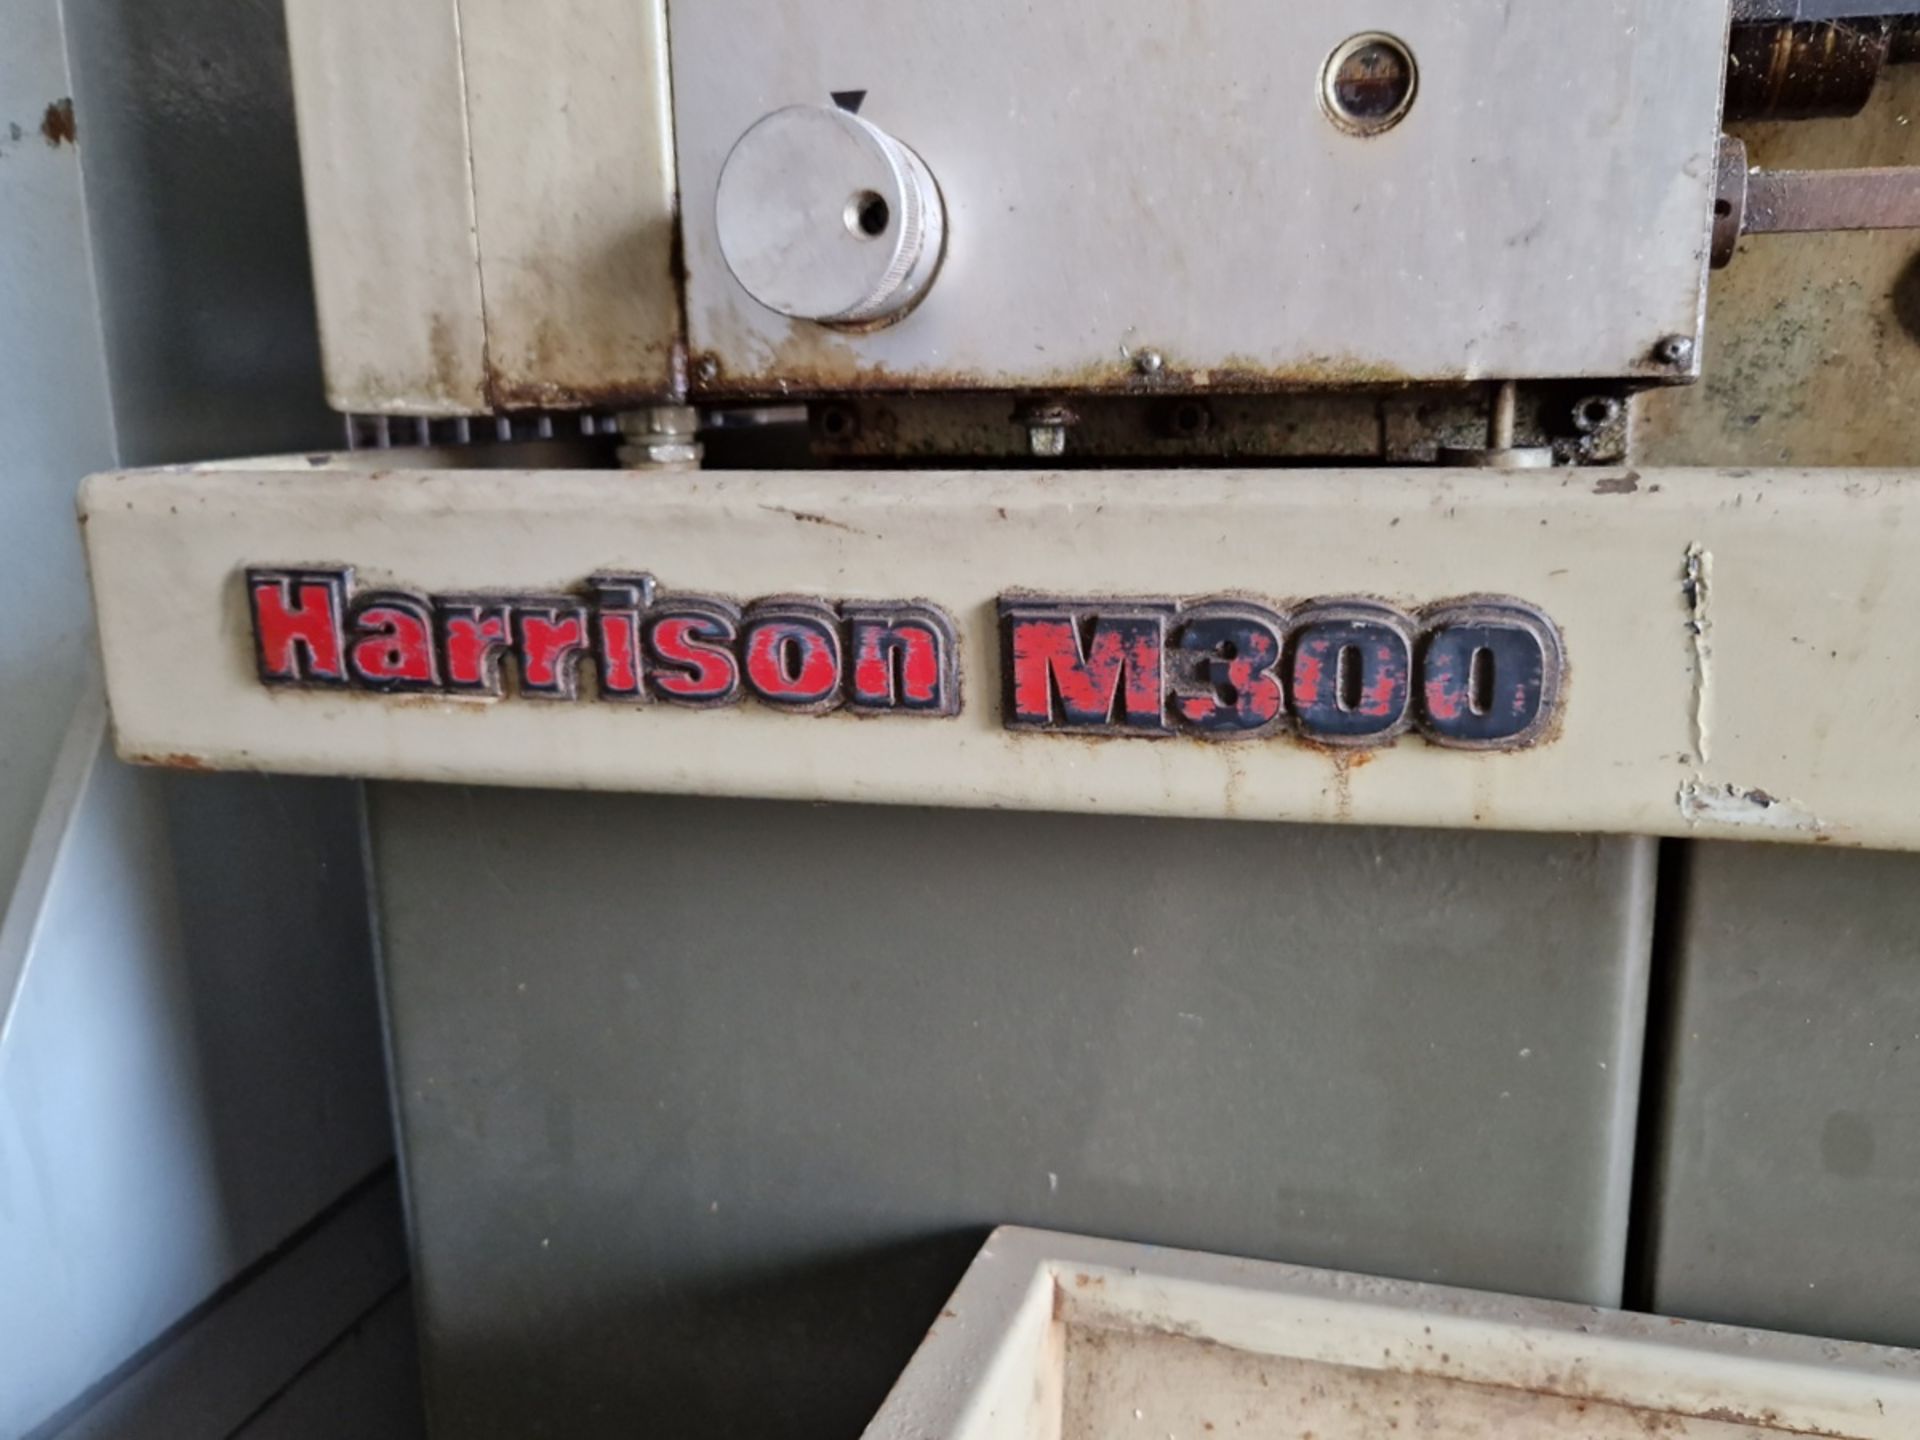 Harrison M300 bed lathe - 415V - 50Hz - tail stock & tool post holder - L 1660 x D 630 x H 1500mm - Image 9 of 10